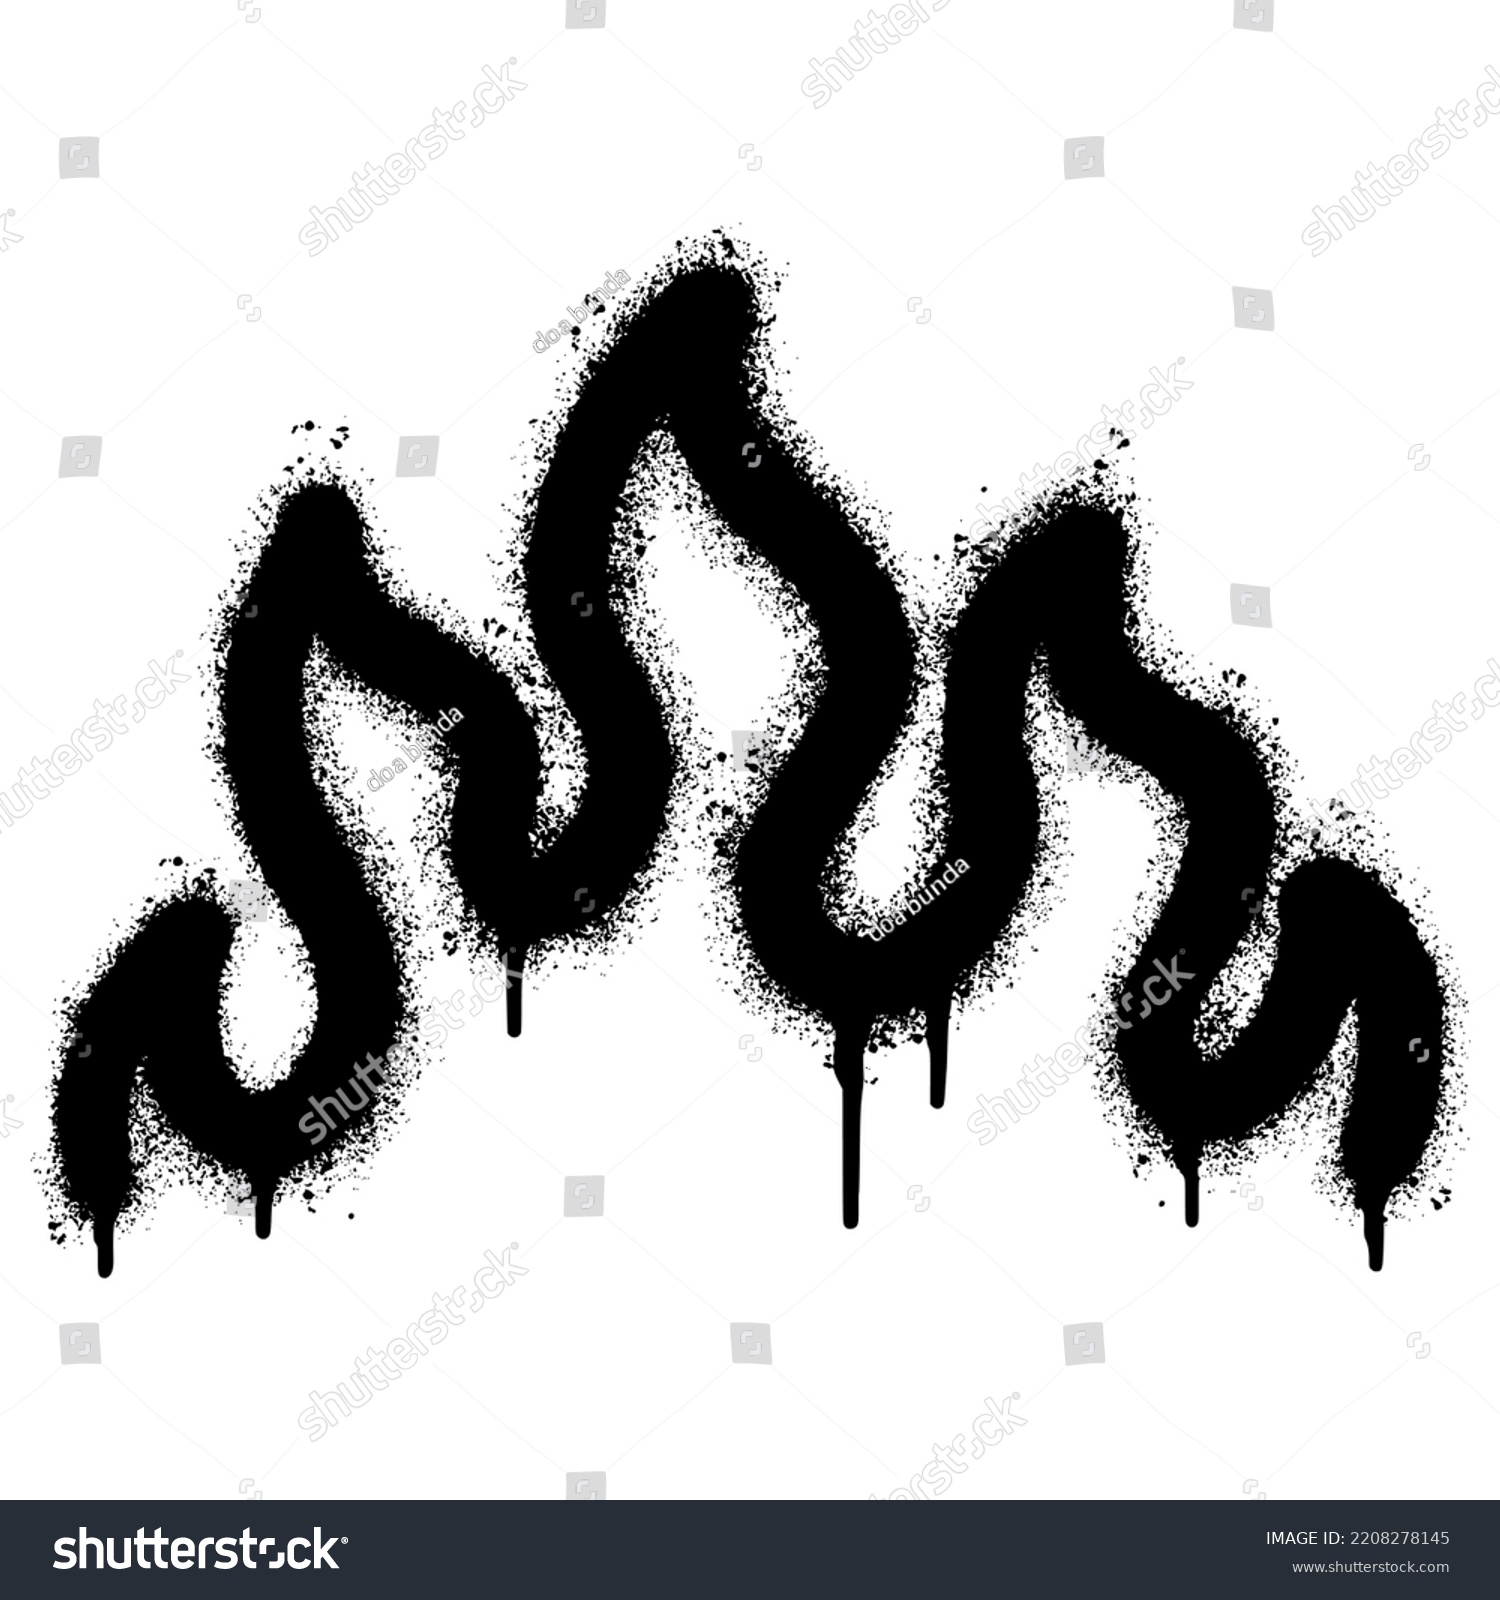 SVG of Spray Painted Graffiti Fire flame icon Sprayed isolated with a white background. graffiti Fire flame icon with over spray in black over white. Vector illustration. svg